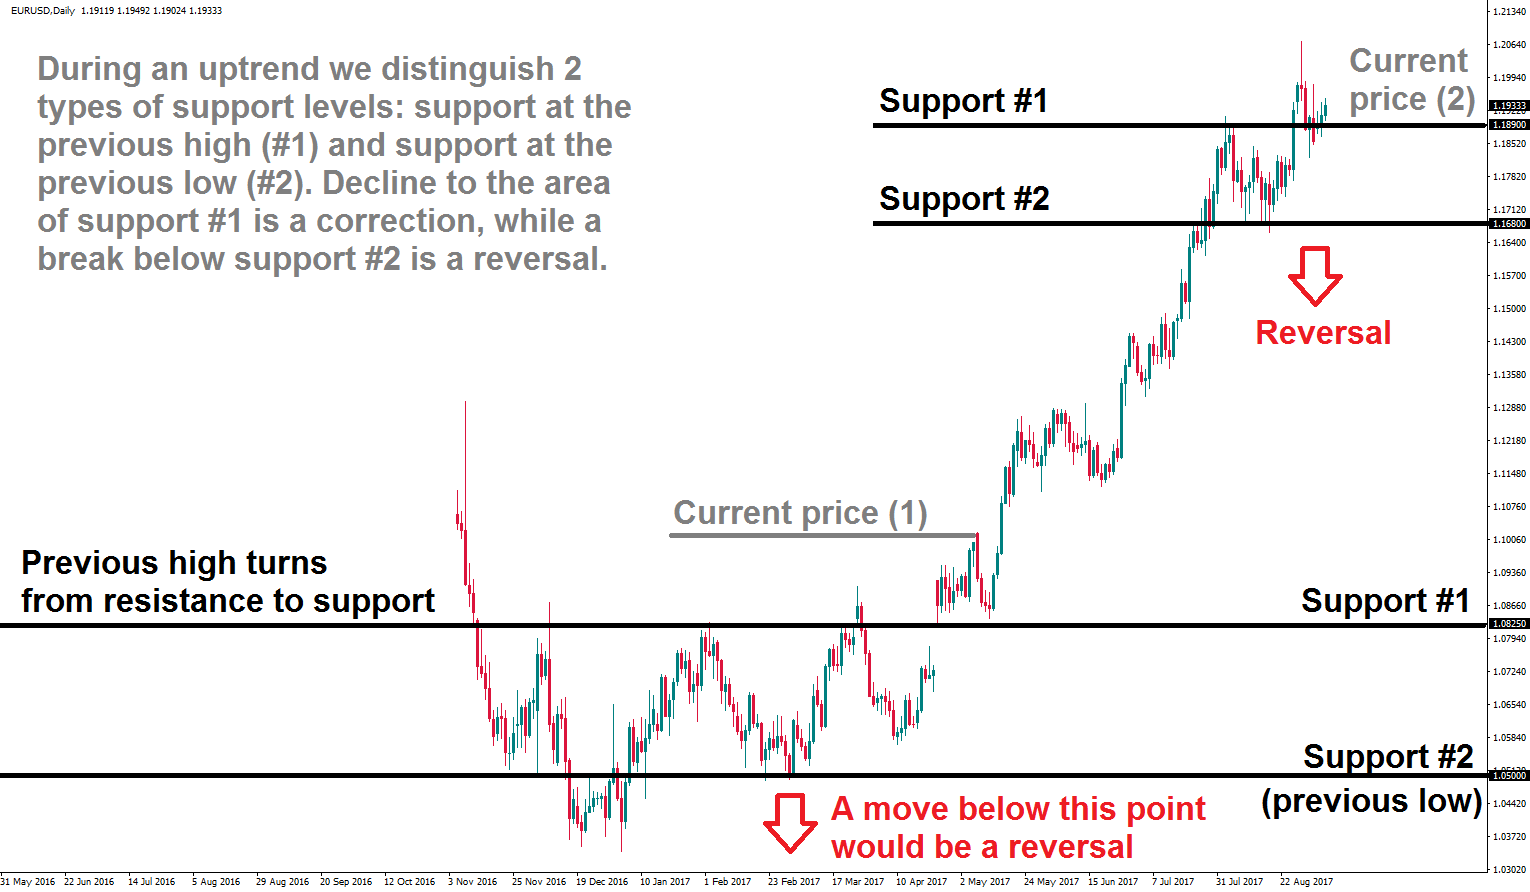 How to identify trend reversal in forex